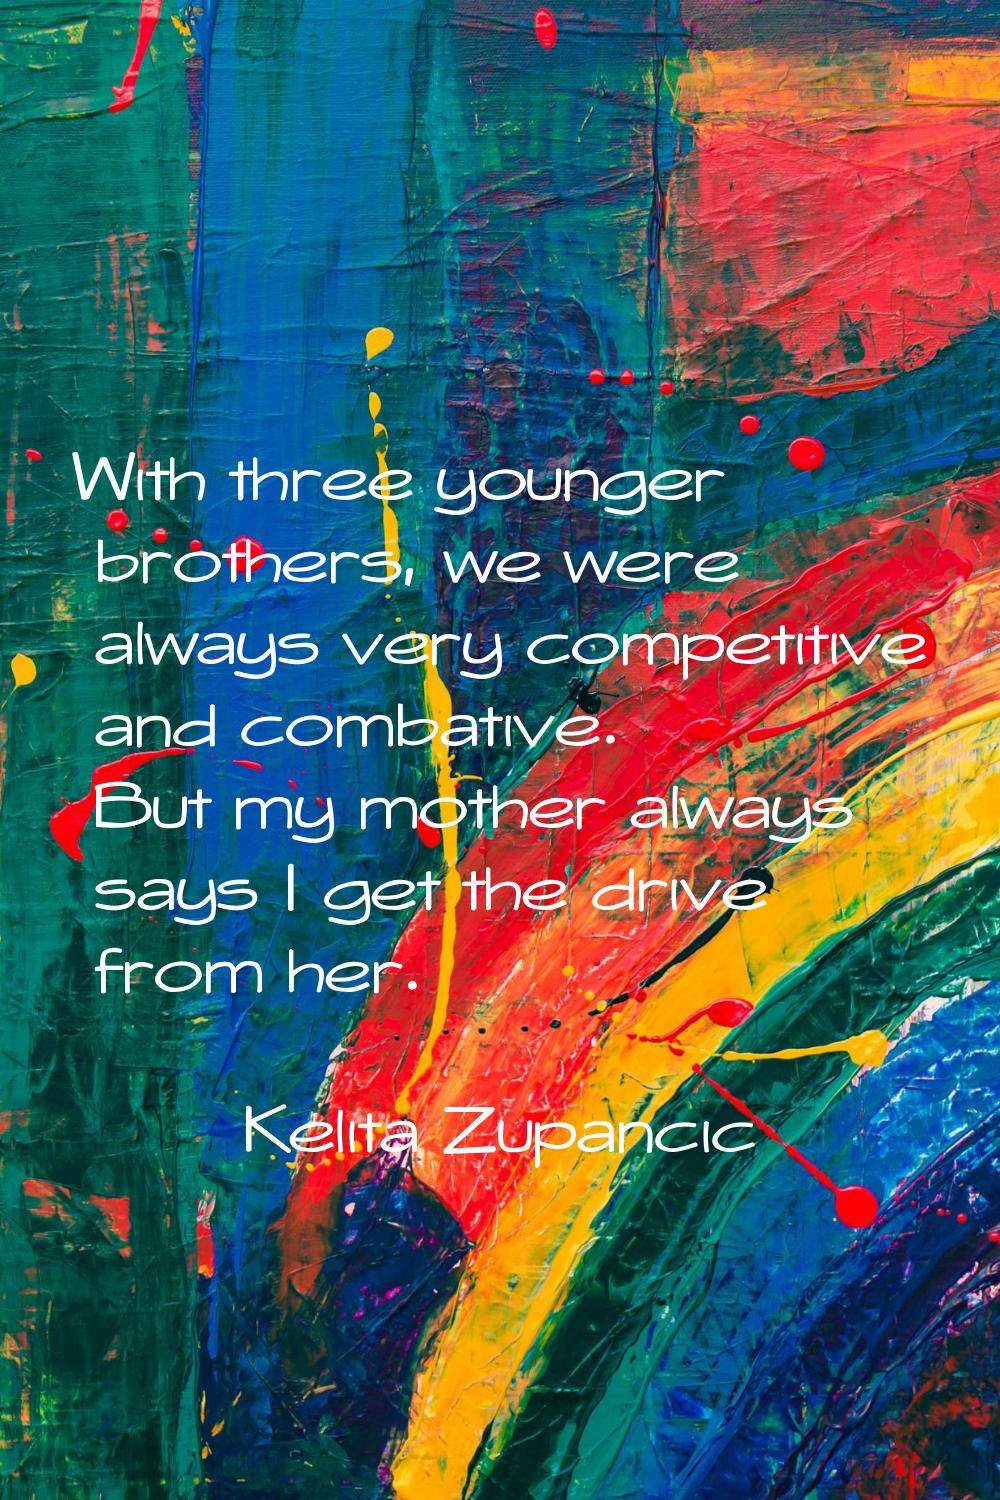 With three younger brothers, we were always very competitive and combative. But my mother always sa